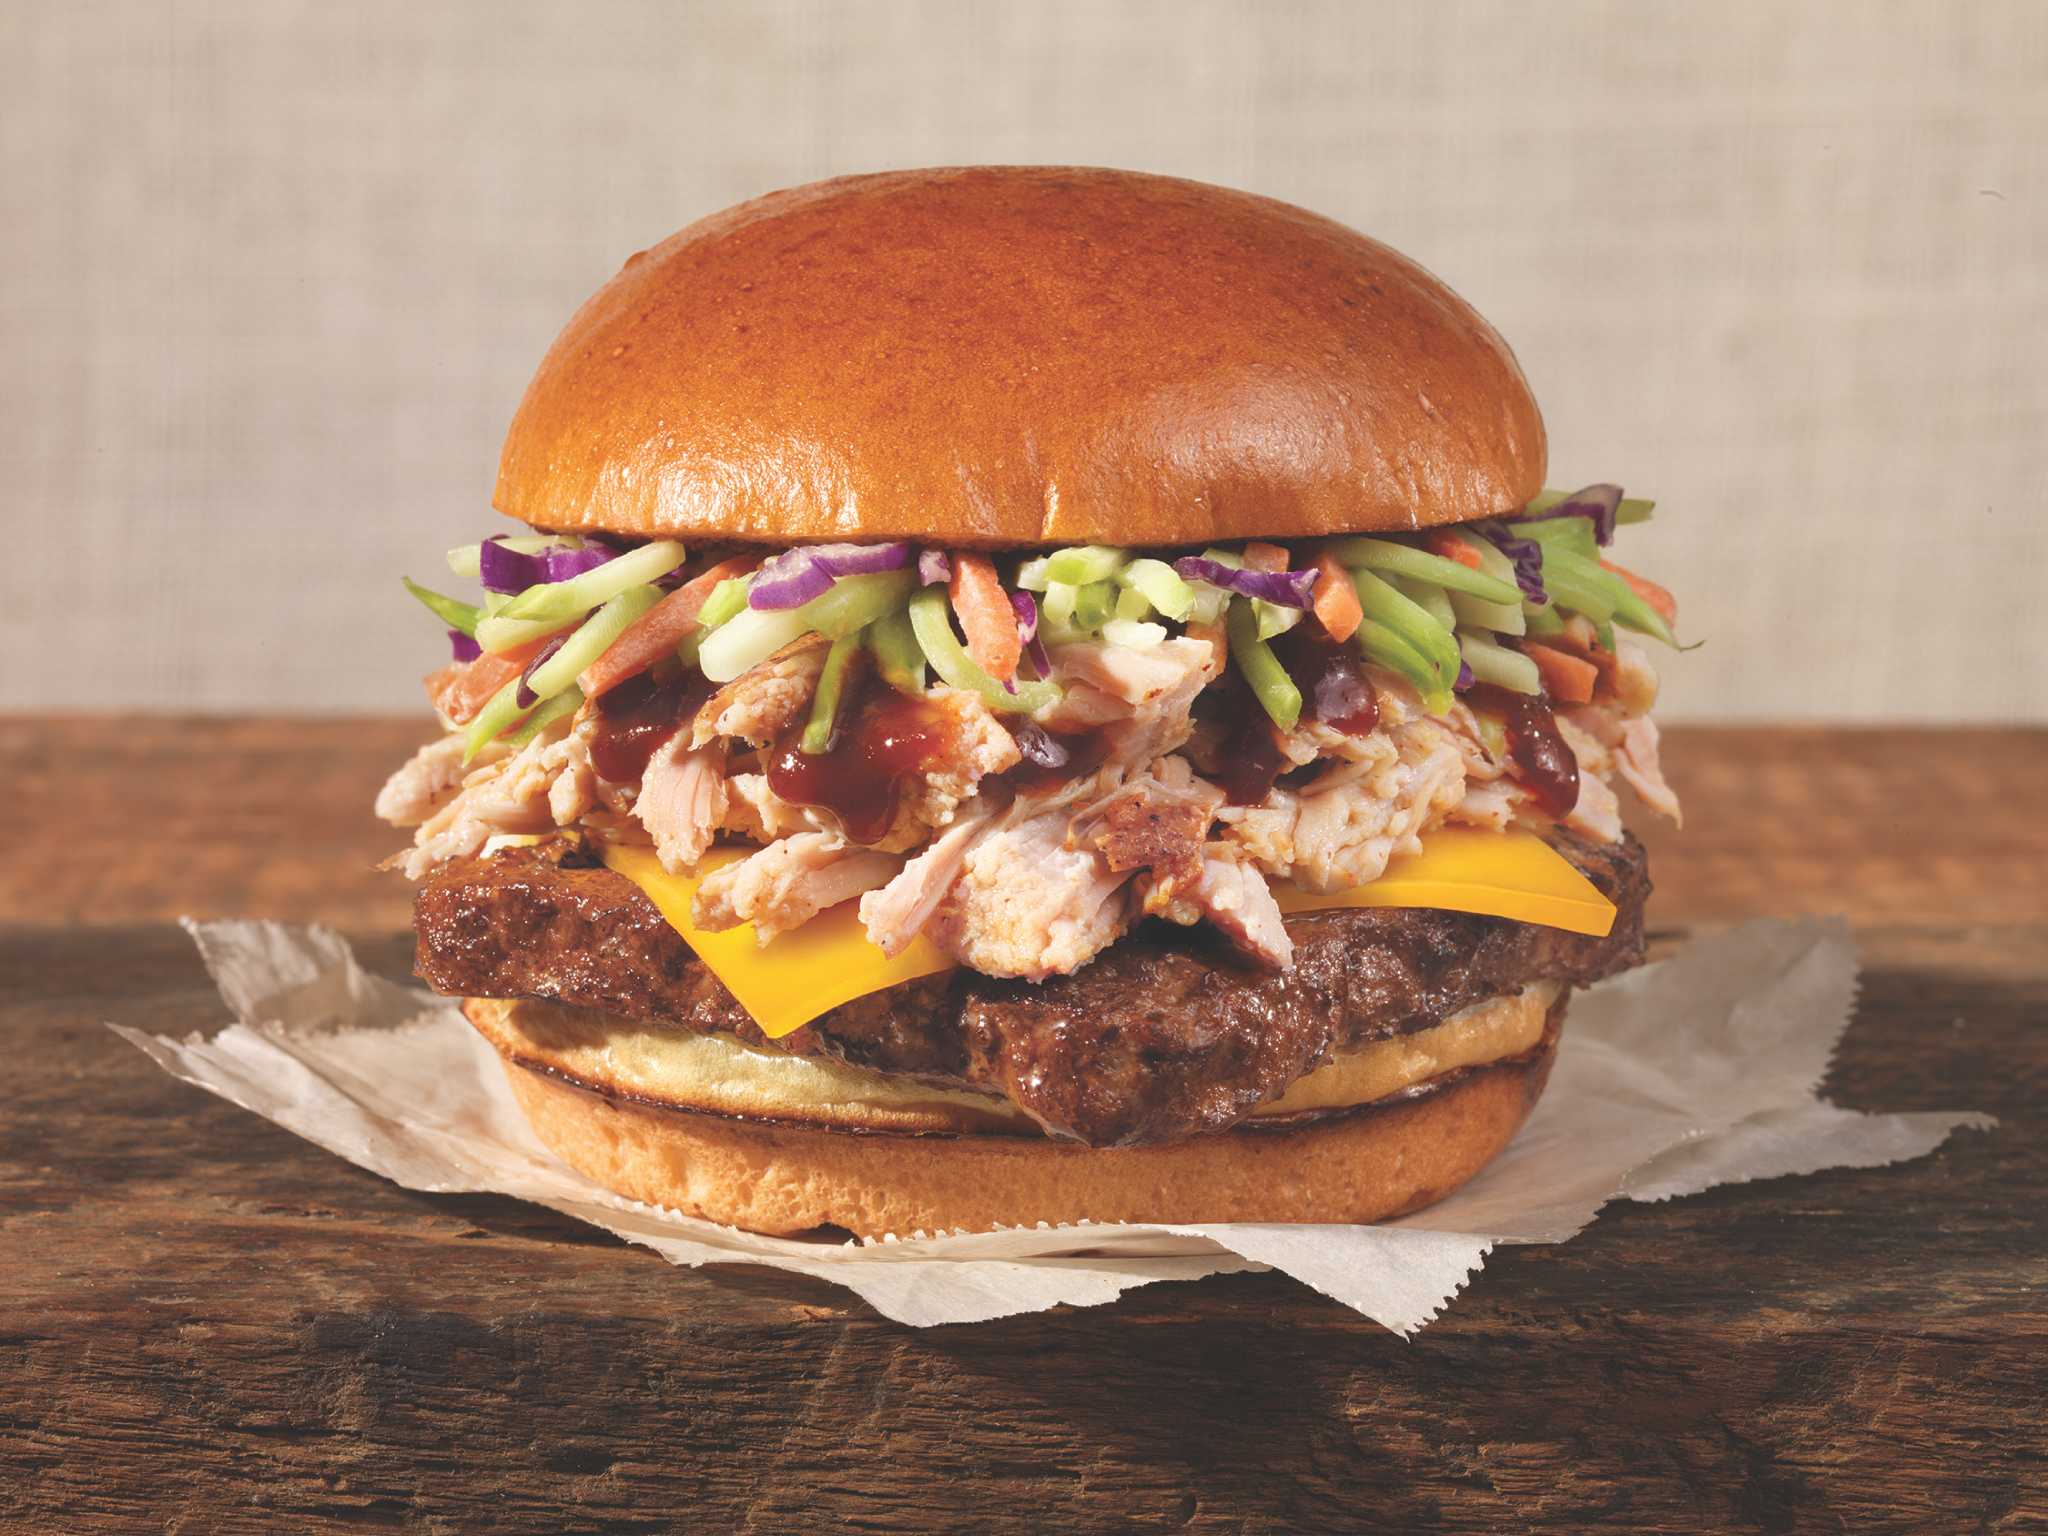 Pulled pork is perfect cheeseburger topper - Houston Chronicle